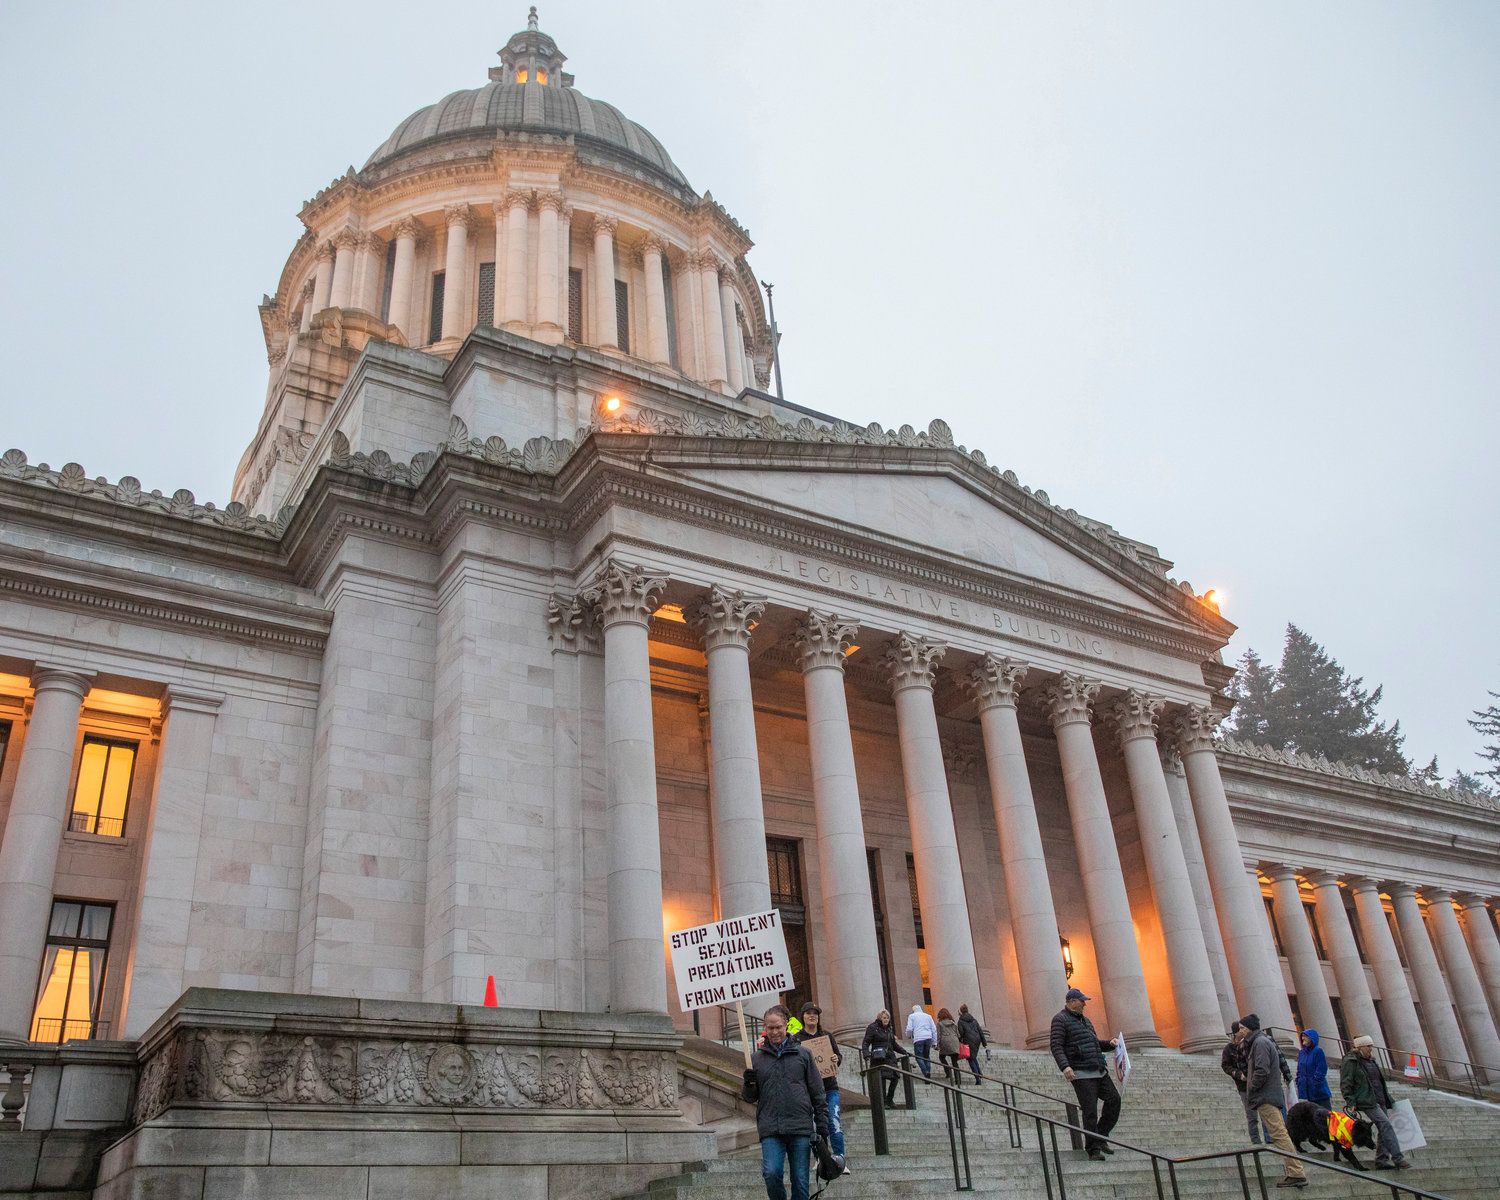 Tenino residents protest Supreme Living outside the Washington State Capitol building in Olympia on Thursday.